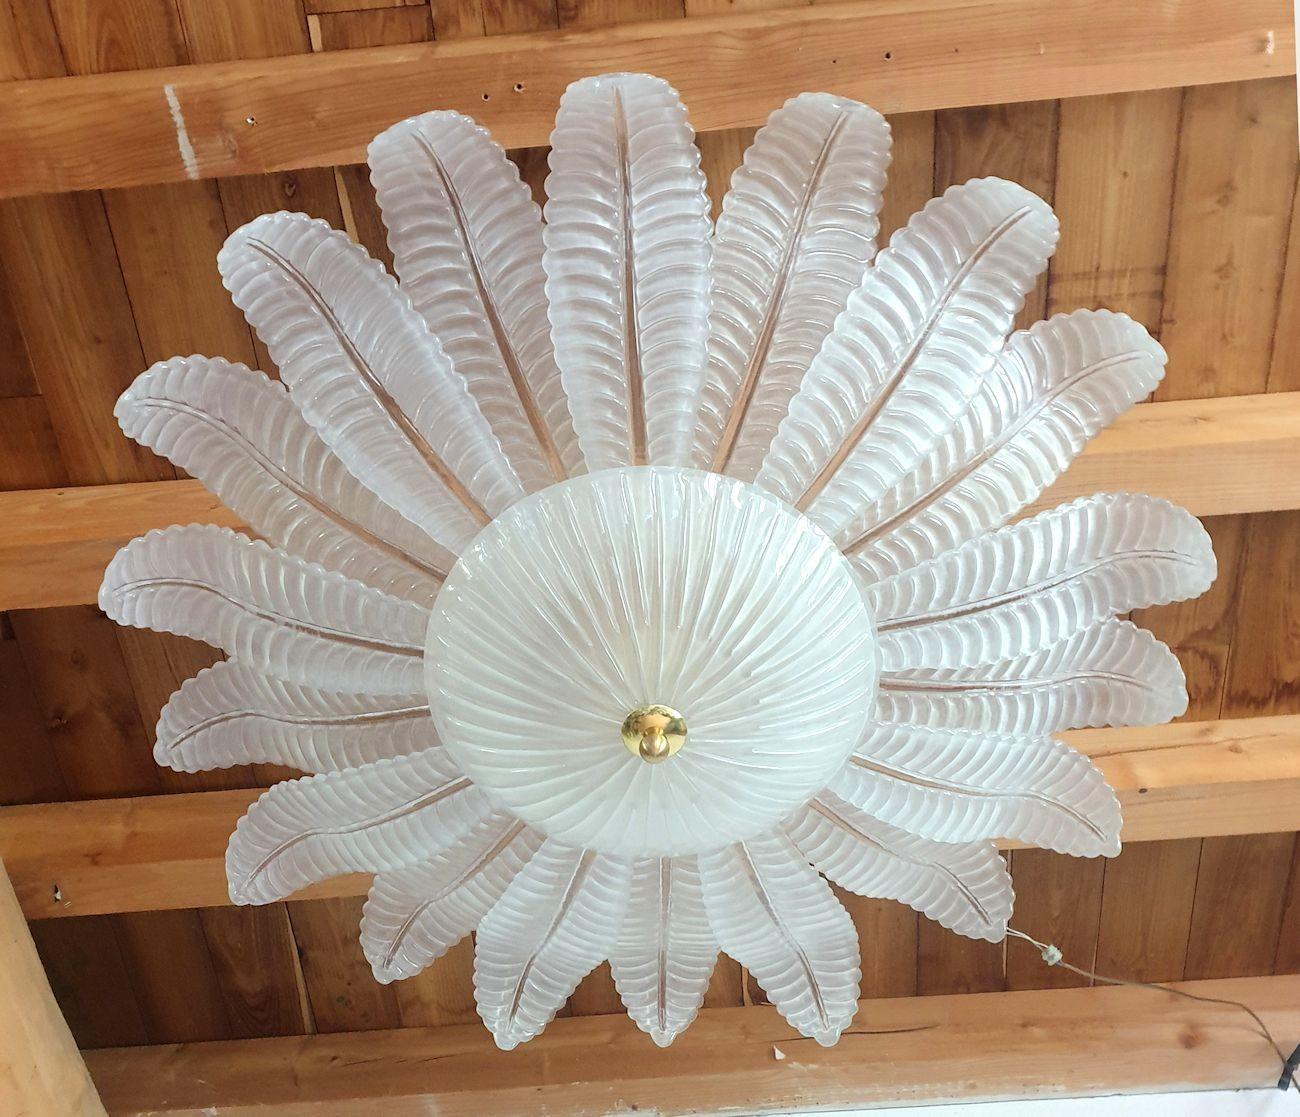 Extra large Leaf Murano glass Mid Century Modern flush-mount chandelier, by Barovier and Toso, Italy 1980s.
The Vintage Chandelier is made of large frosted Murano glass leaves and a center bowl, on a white painted frame.
With brass elements: finial